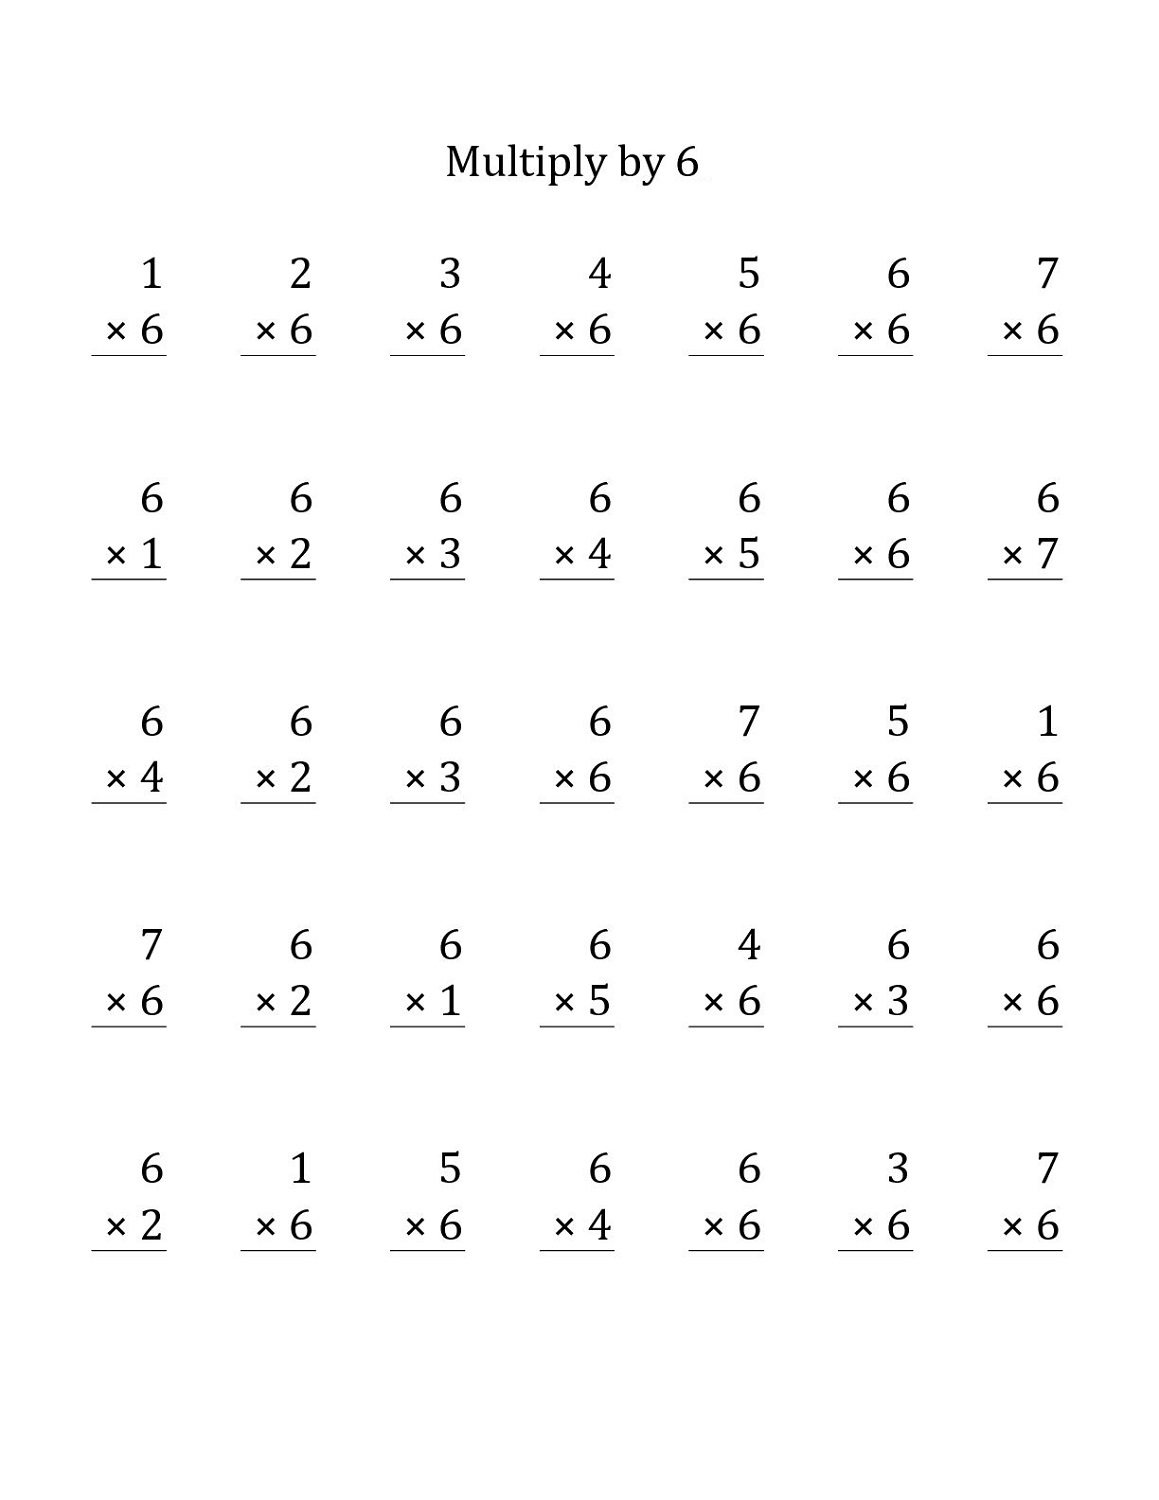 6 times table worksheets fun